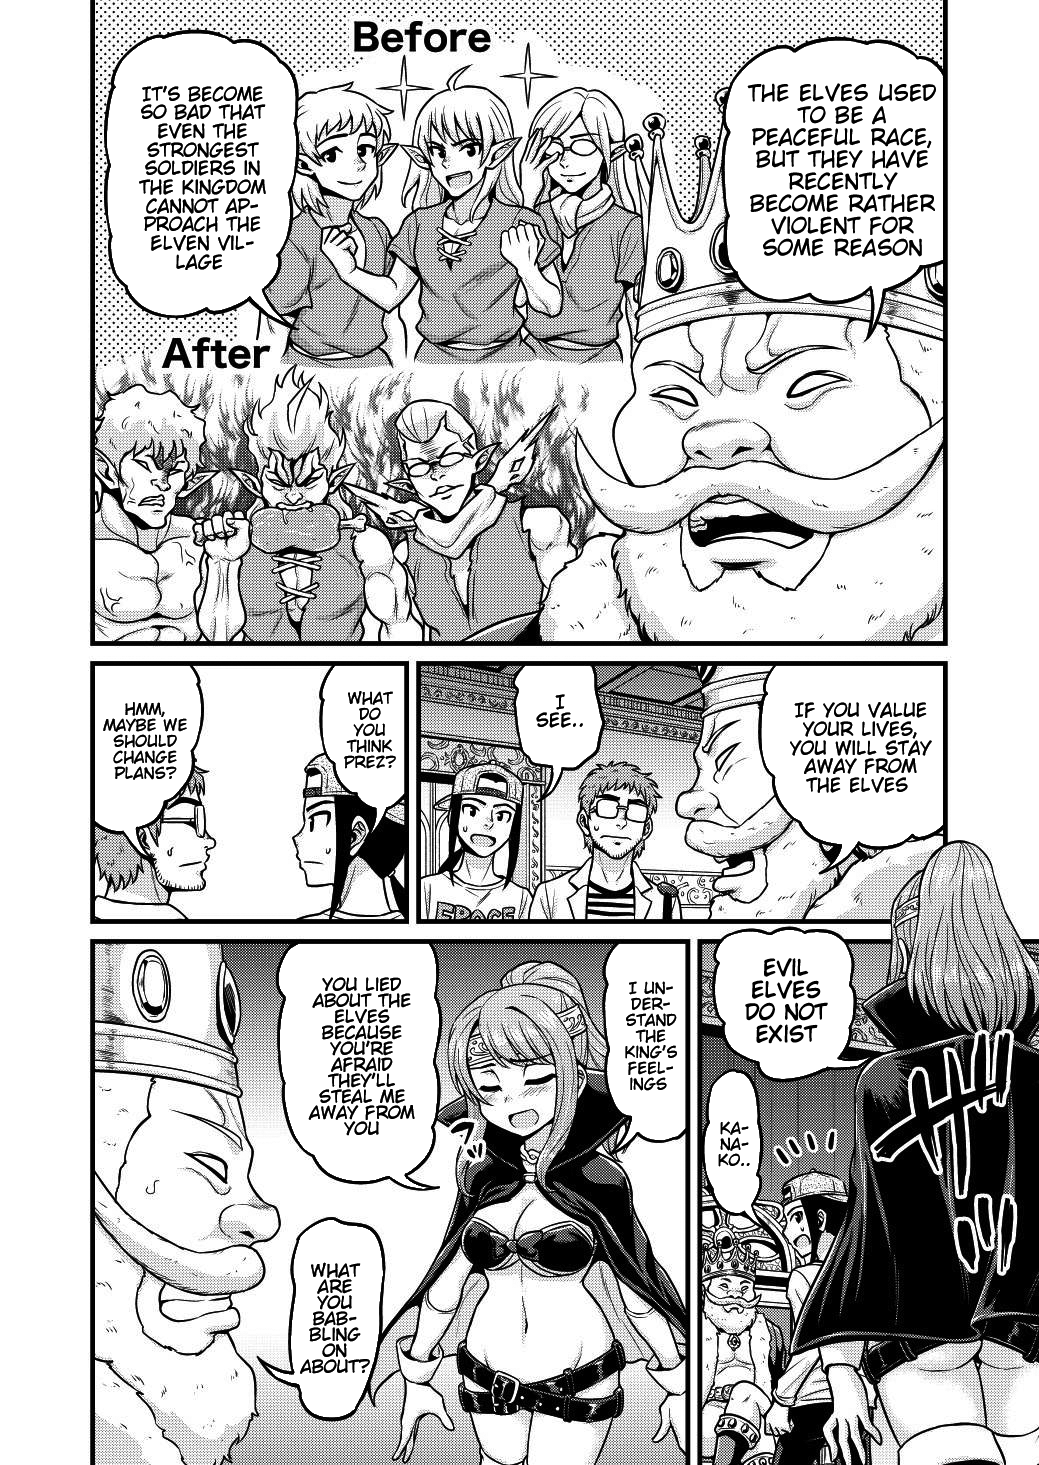 Filming Adult Videos in Another World - Chapter 3 Page 7